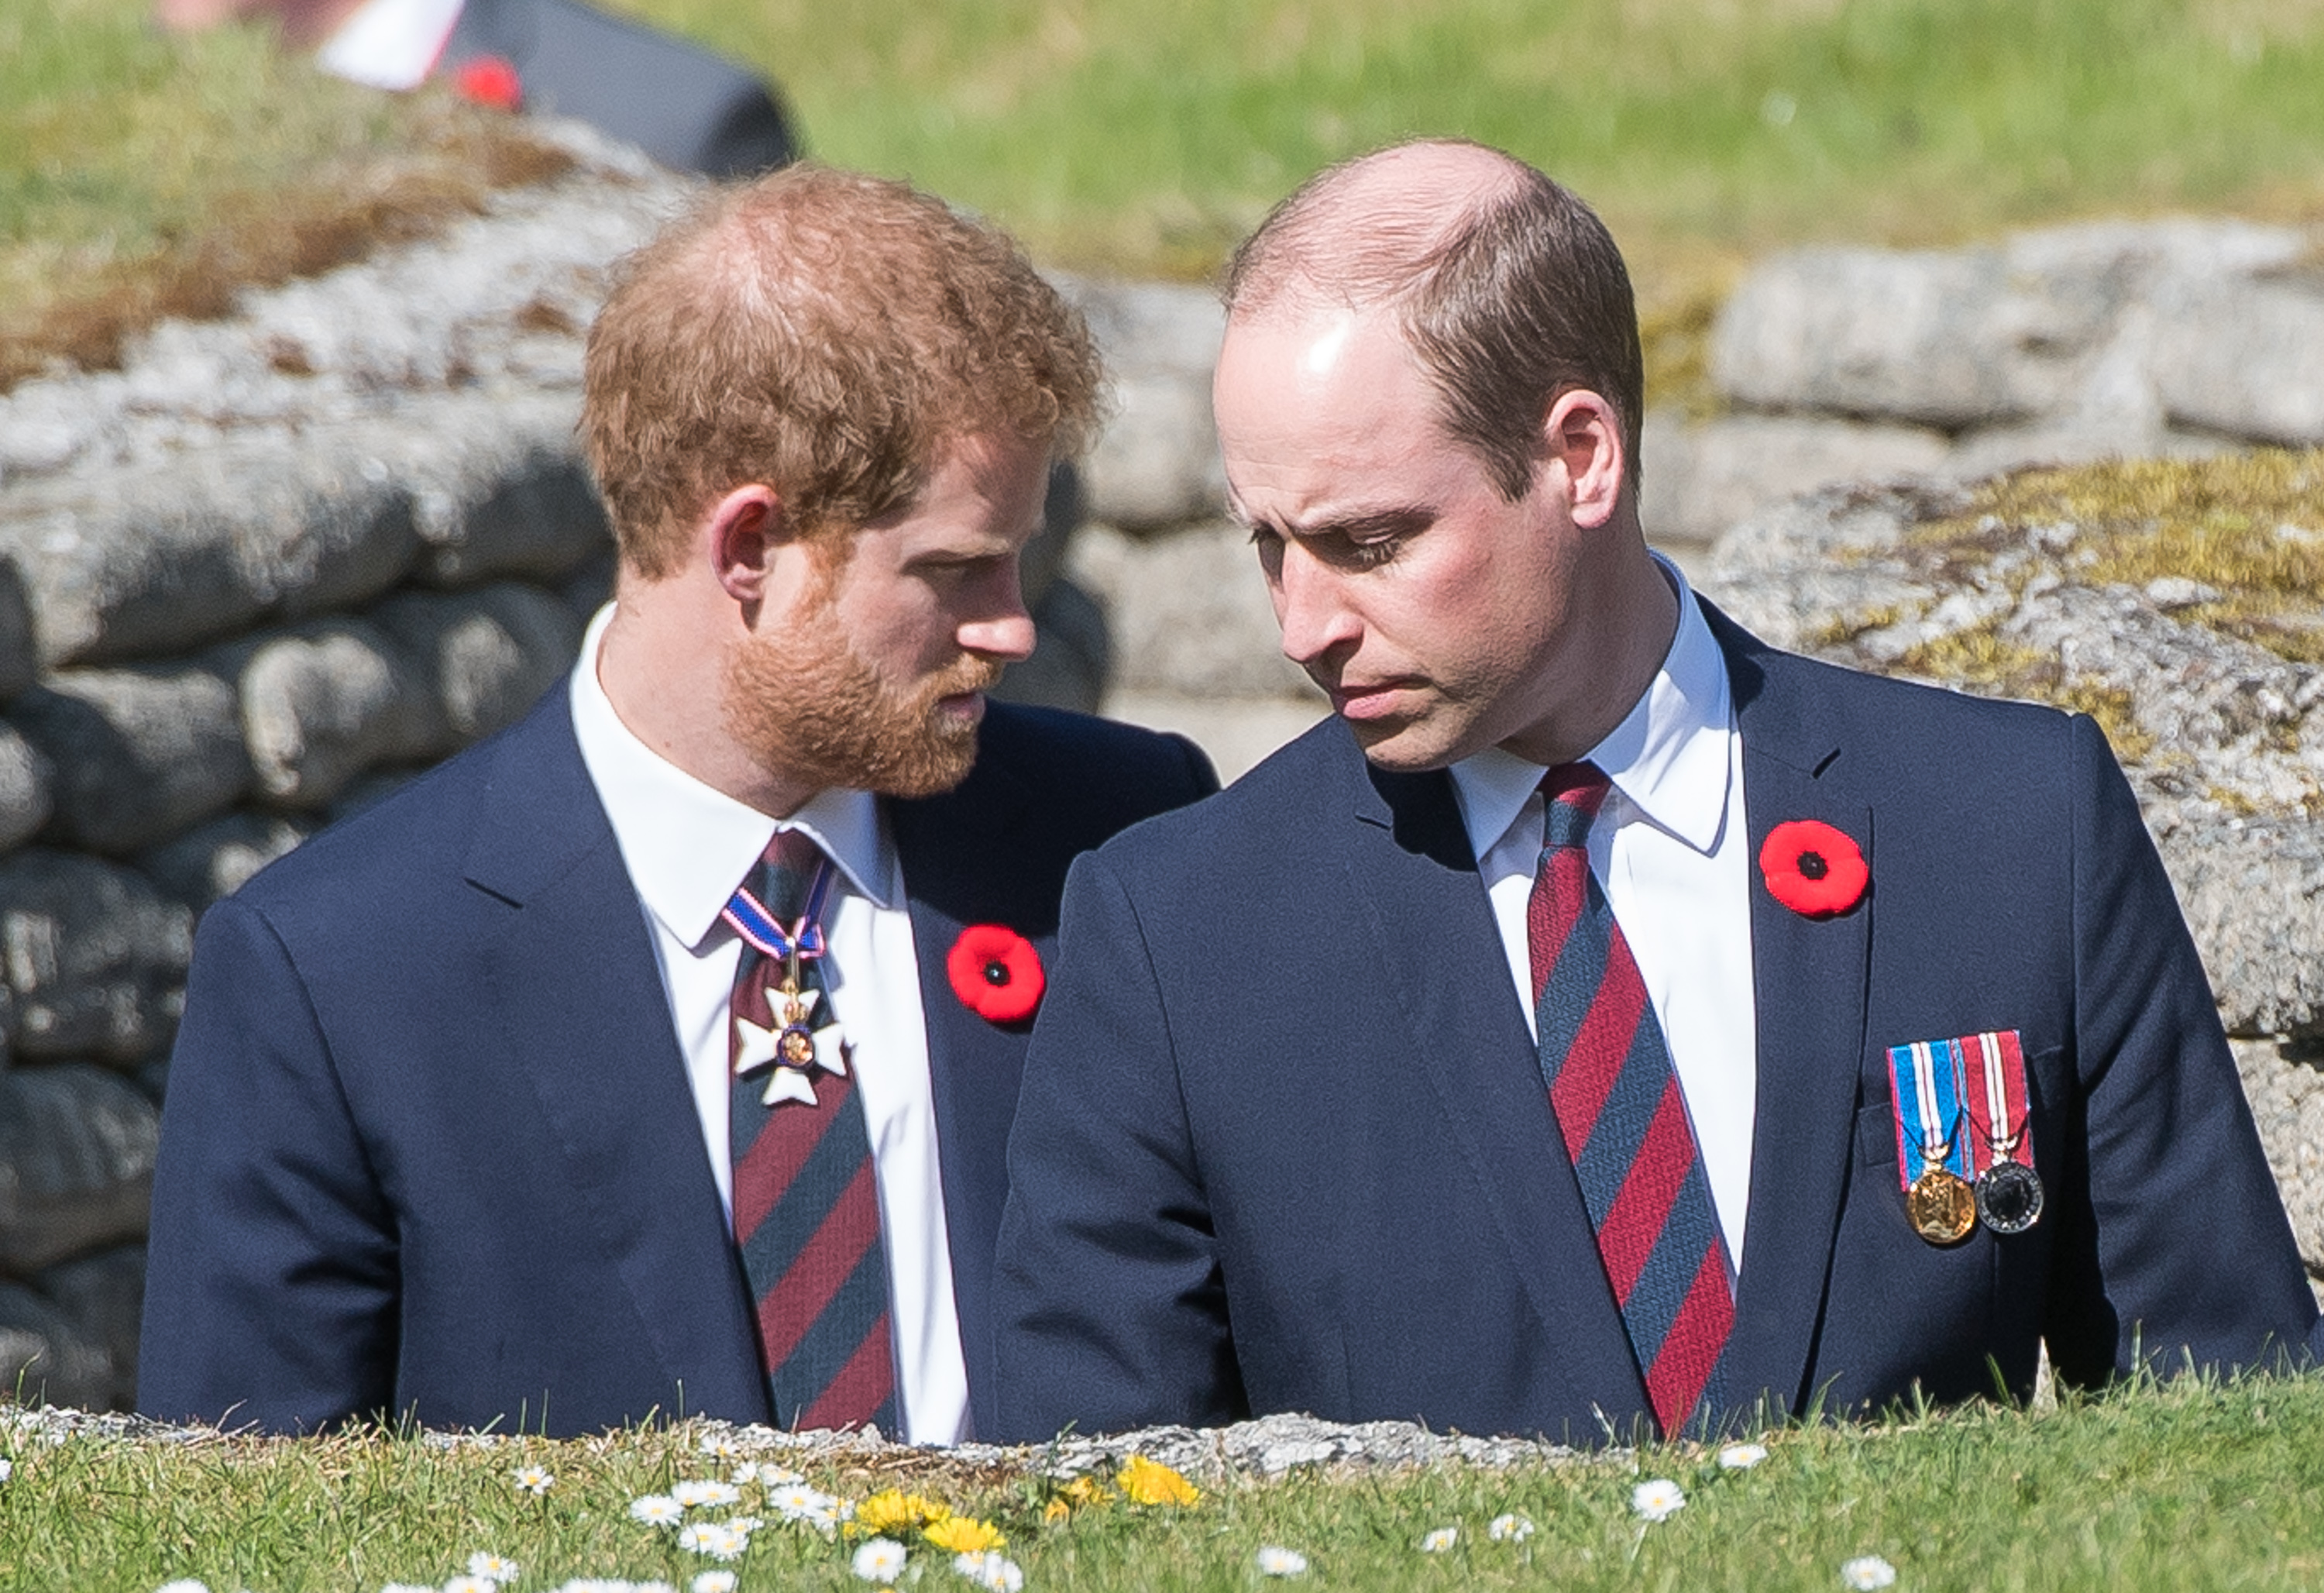 Prince William, Duke of Cambridge and Prince Harry during the commemorations for the 100th anniversary of the battle of Vimy Ridge on April 9, 2017 in Lille, France | Source: Getty Images